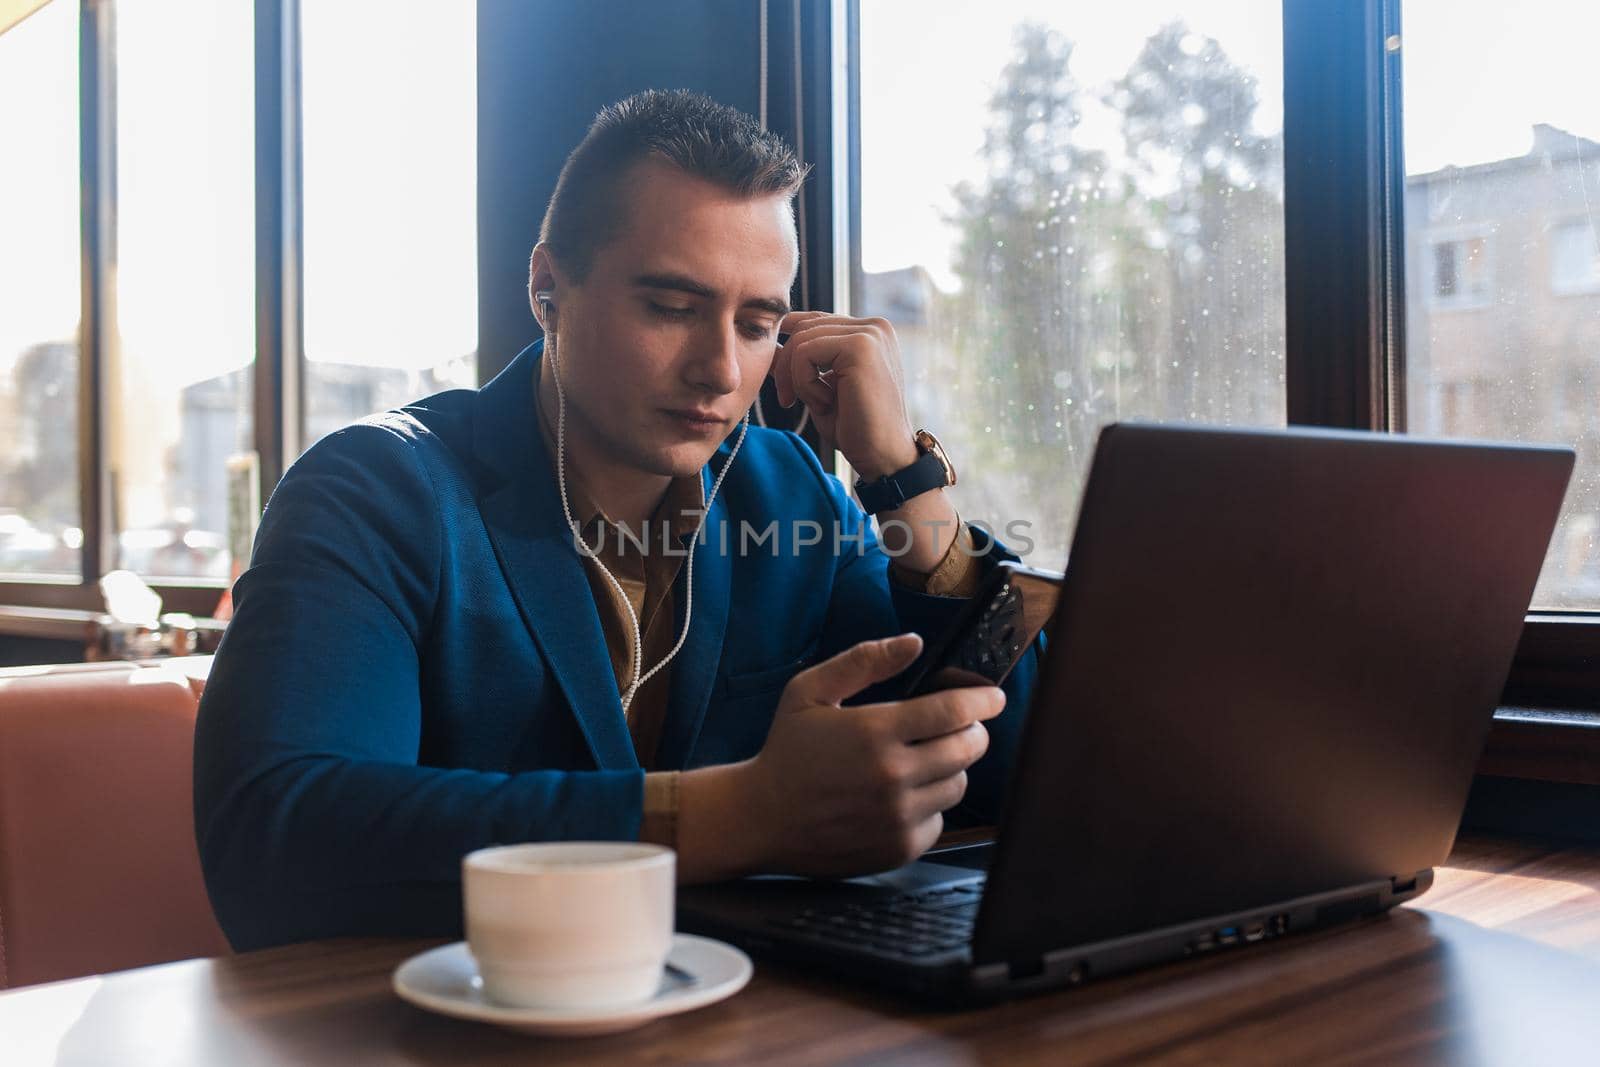 A business man stylish businessman in an attractive European-looking suit works in a laptop, listens to music with headphones and drinks coffee sitting at a table in a cafe by the window.